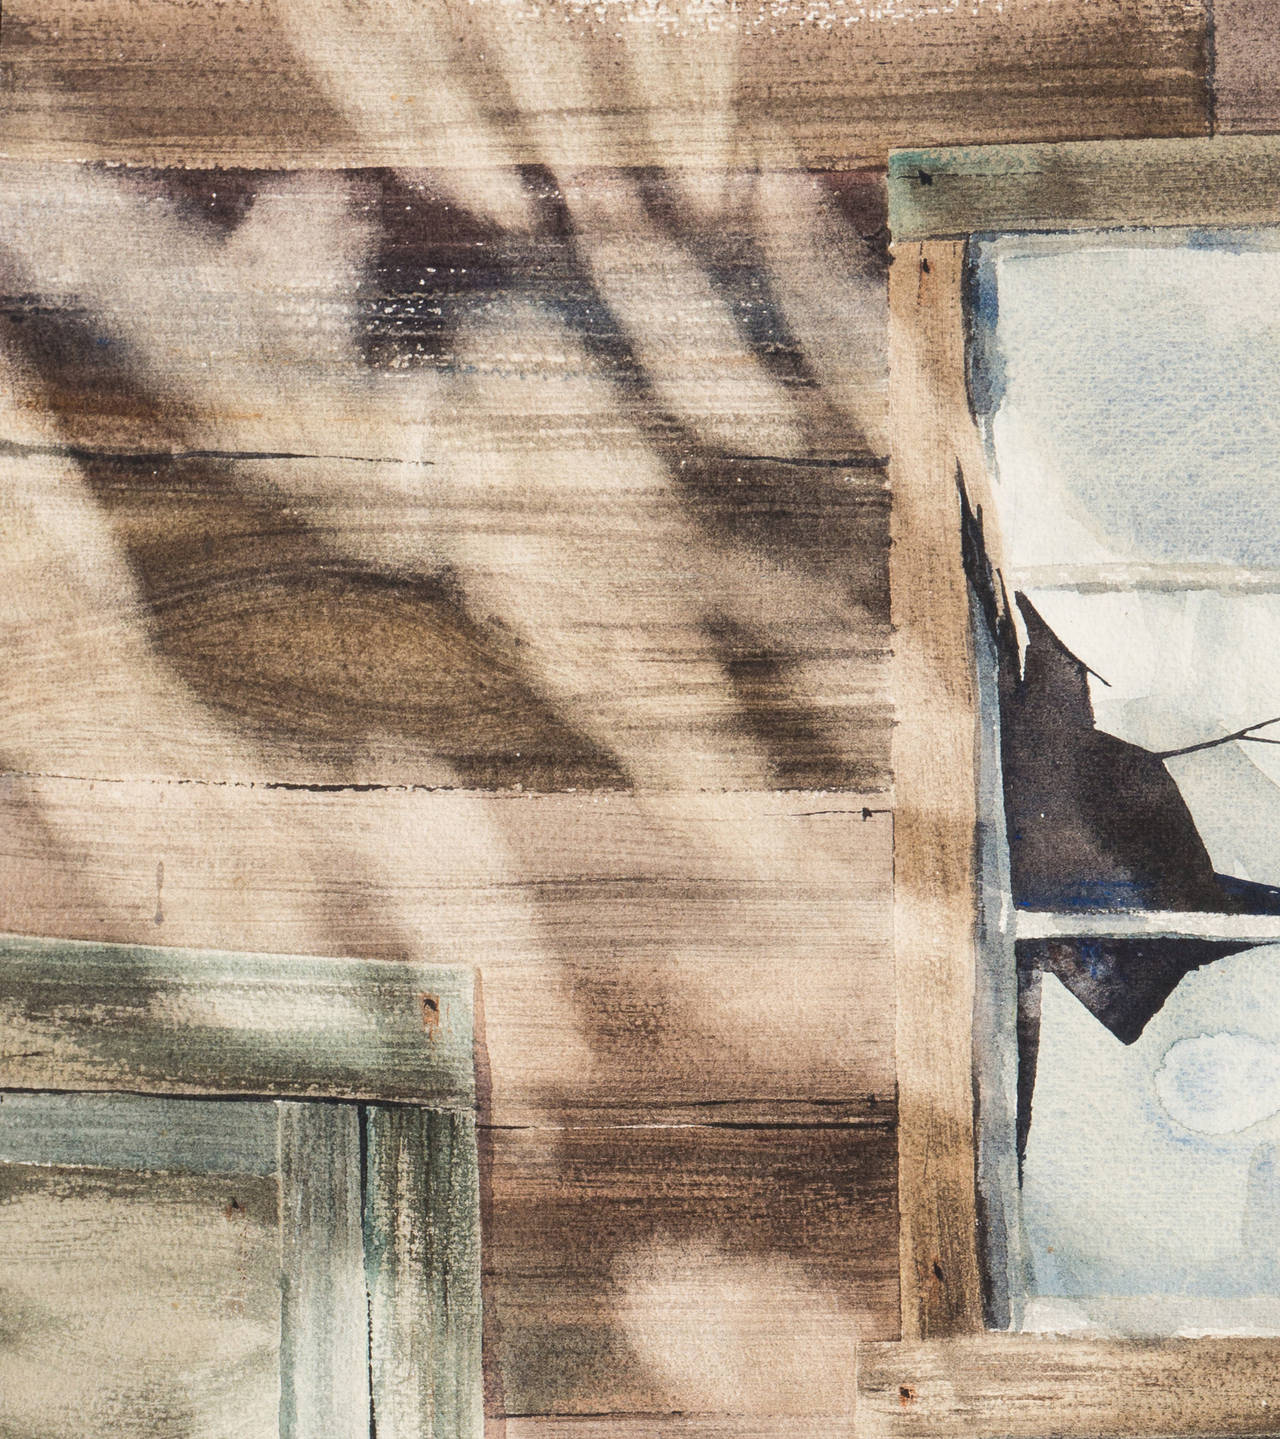 'Memory', American school, clapboard house, study of light, window, San Diego - Painting by Sharon Hinckley